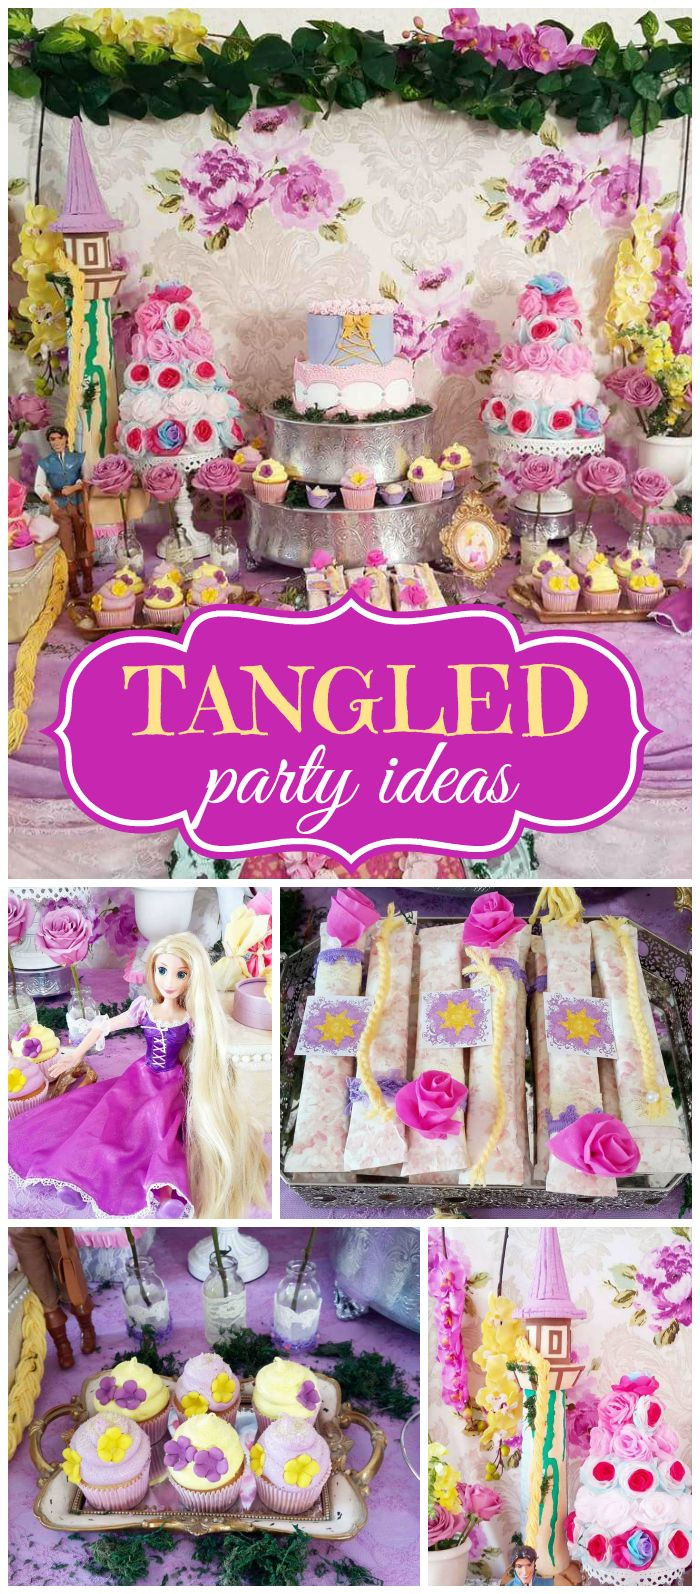 Tangled Birthday Party Supplies
 What a fantastic Tangled party Such elaborate decorations